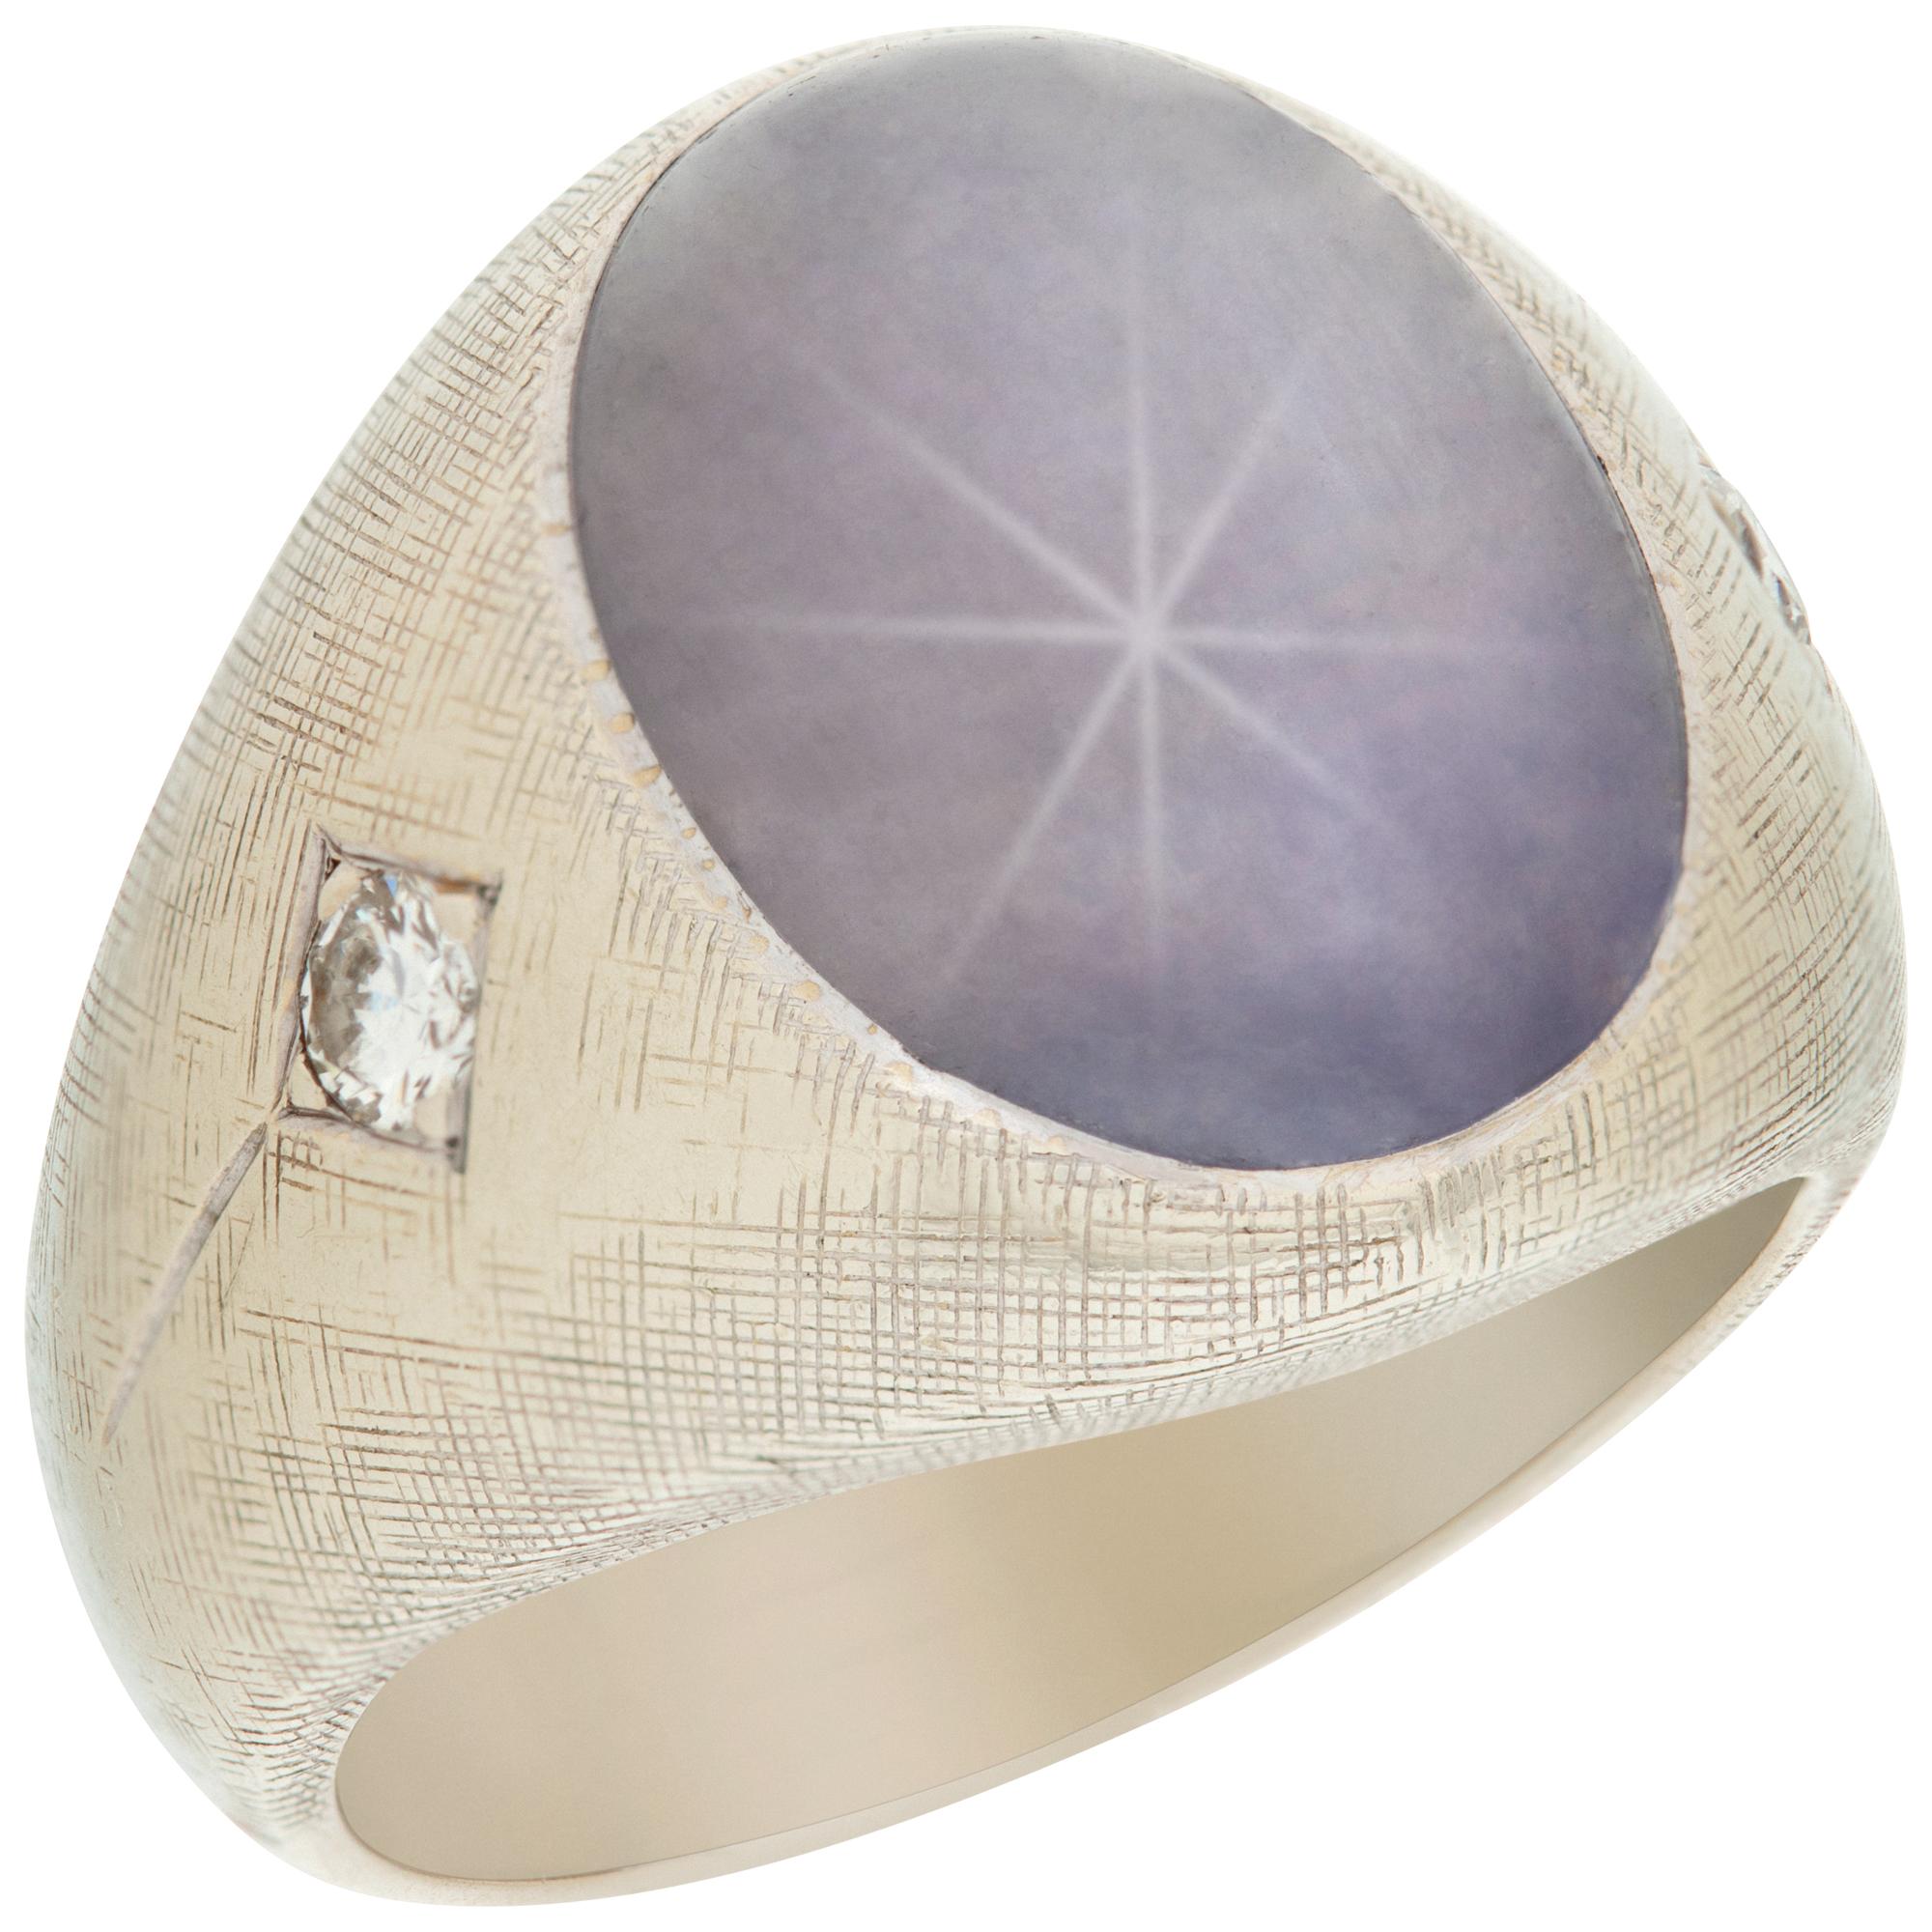 Star sapphire 14k white gold ring with 2 diamond accents. In Excellent Condition For Sale In Surfside, FL